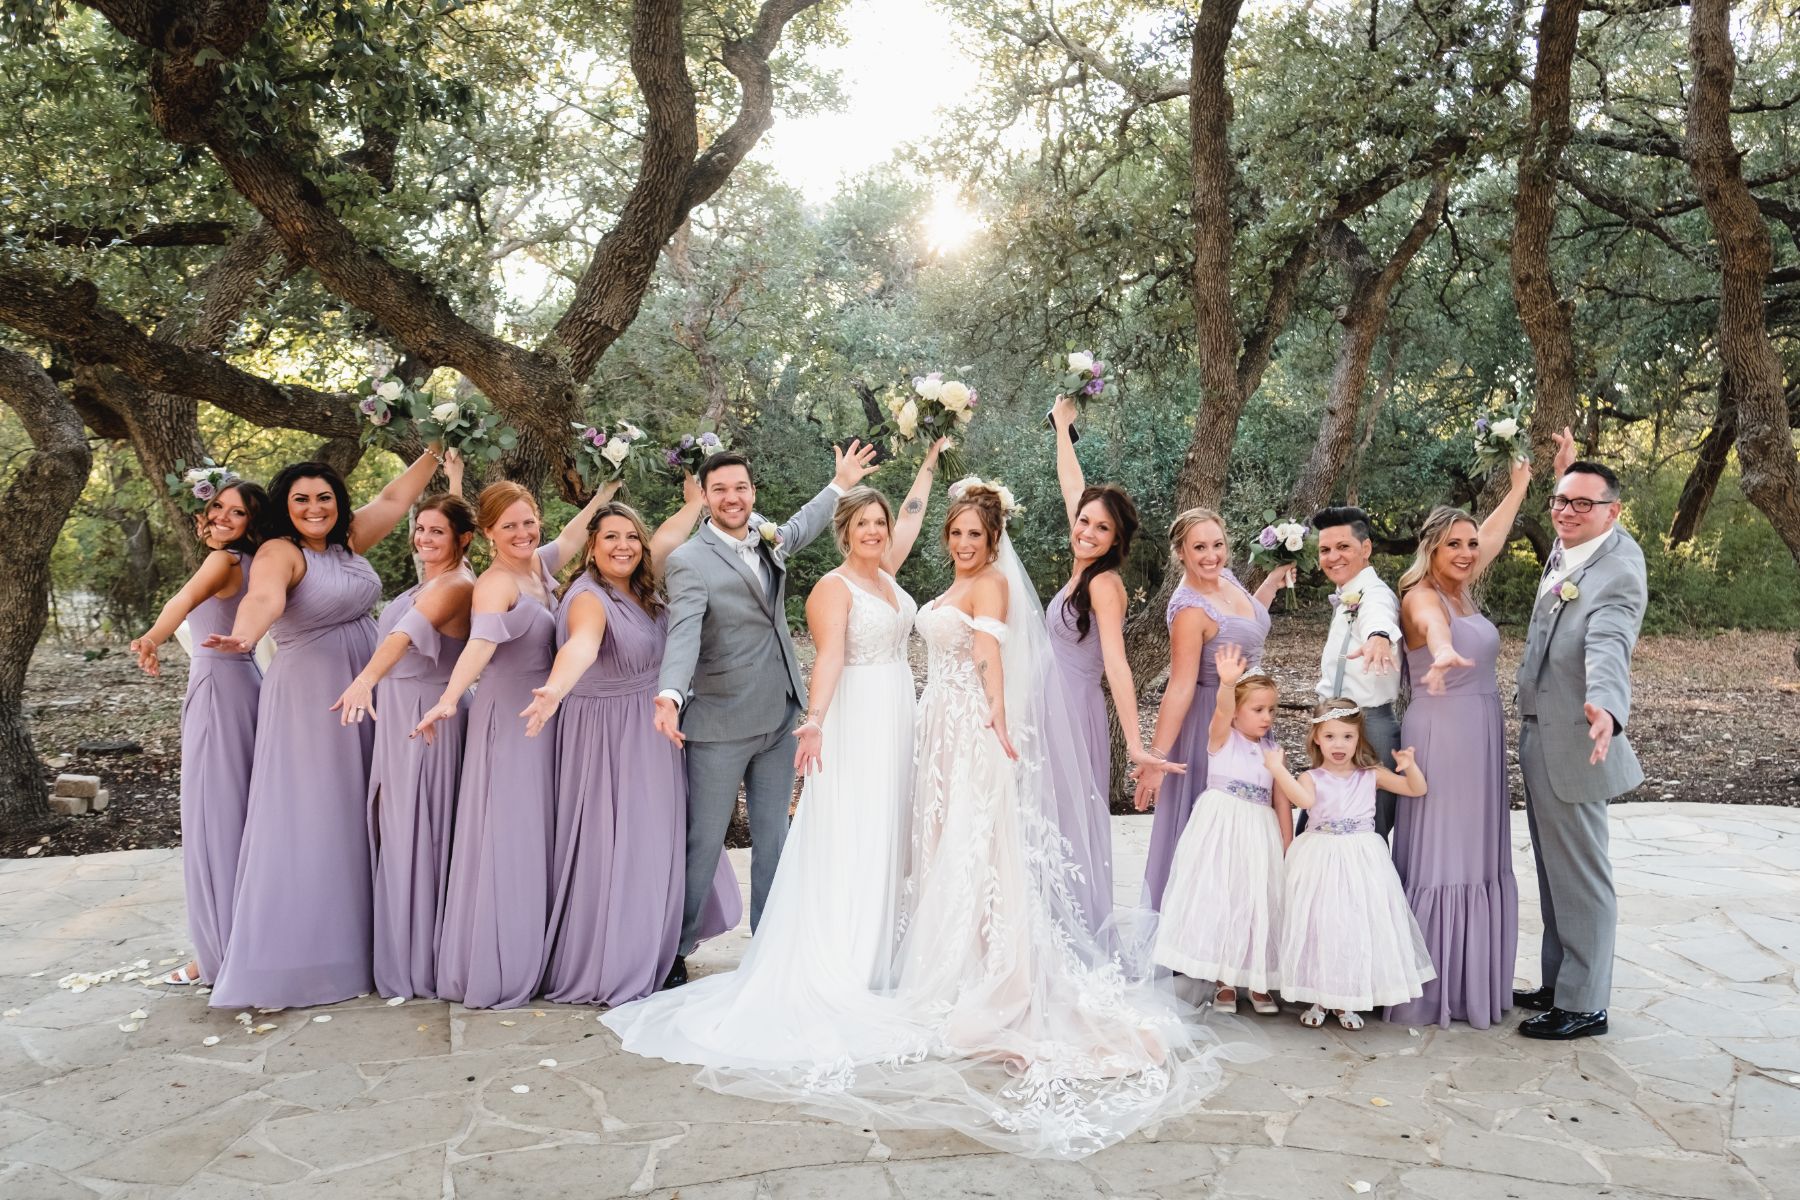 I ate bridal party, raises their hands in celebration surrounding two brides with large oak trees in the background.